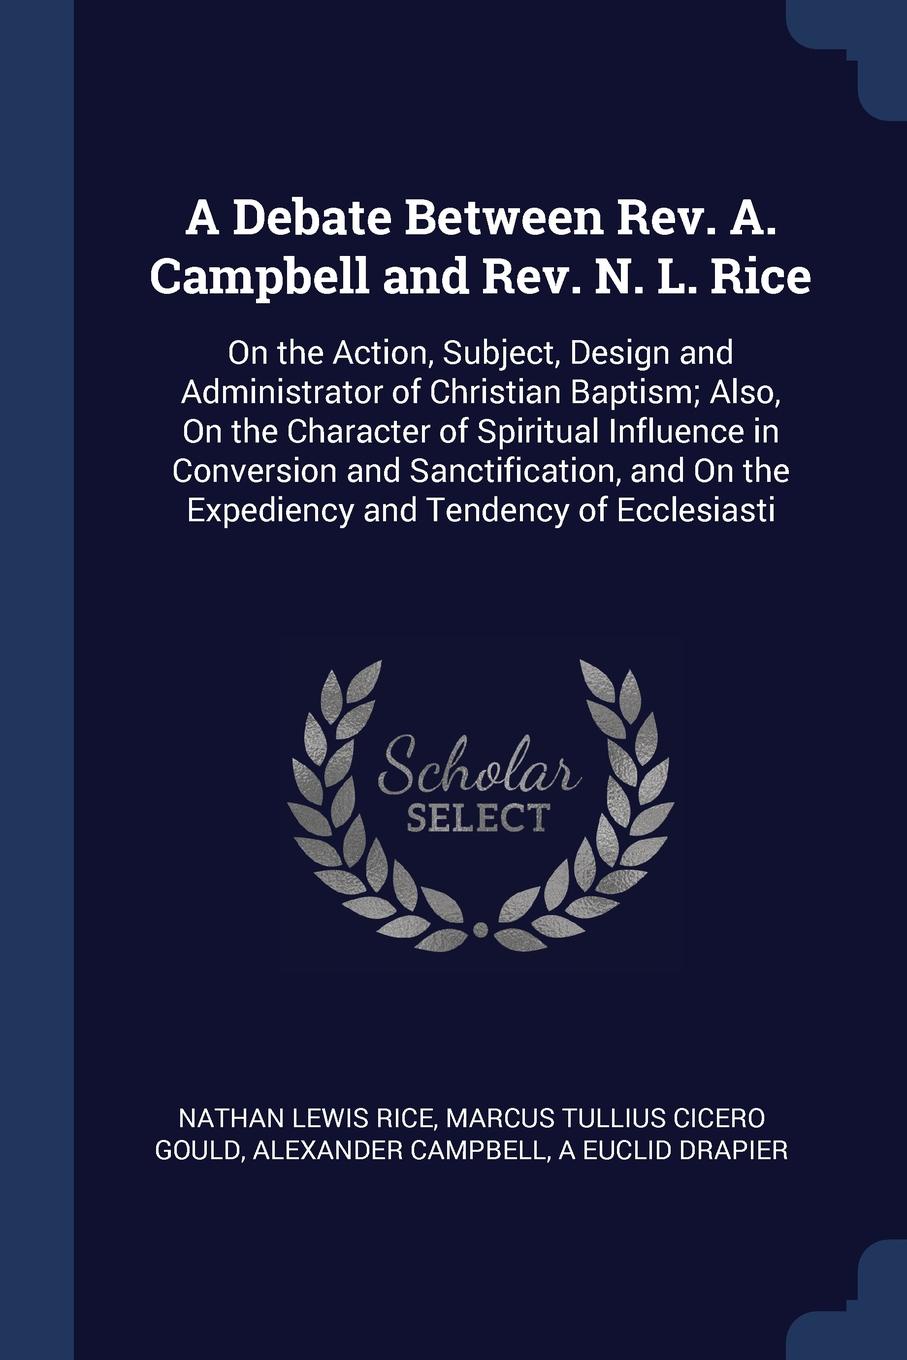 A Debate Between Rev. A. Campbell and Rev. N. L. Rice. On the Action, Subject, Design and Administrator of Christian Baptism; Also, On the Character of Spiritual Influence in Conversion and Sanctification, and On the Expediency and Tendency of Ecc...